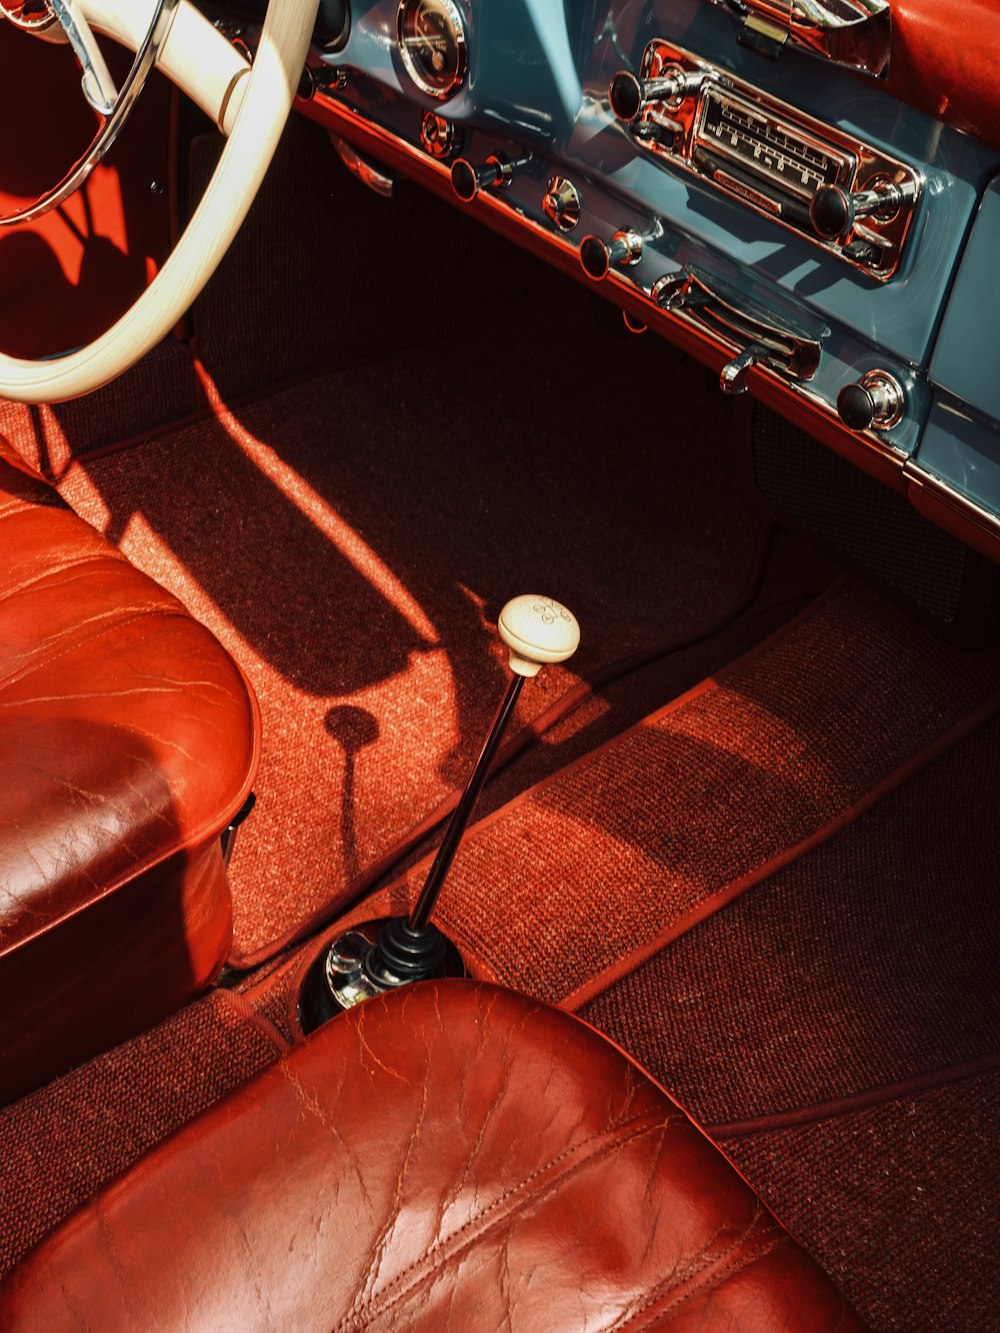 the interior of a classic car with leather seats